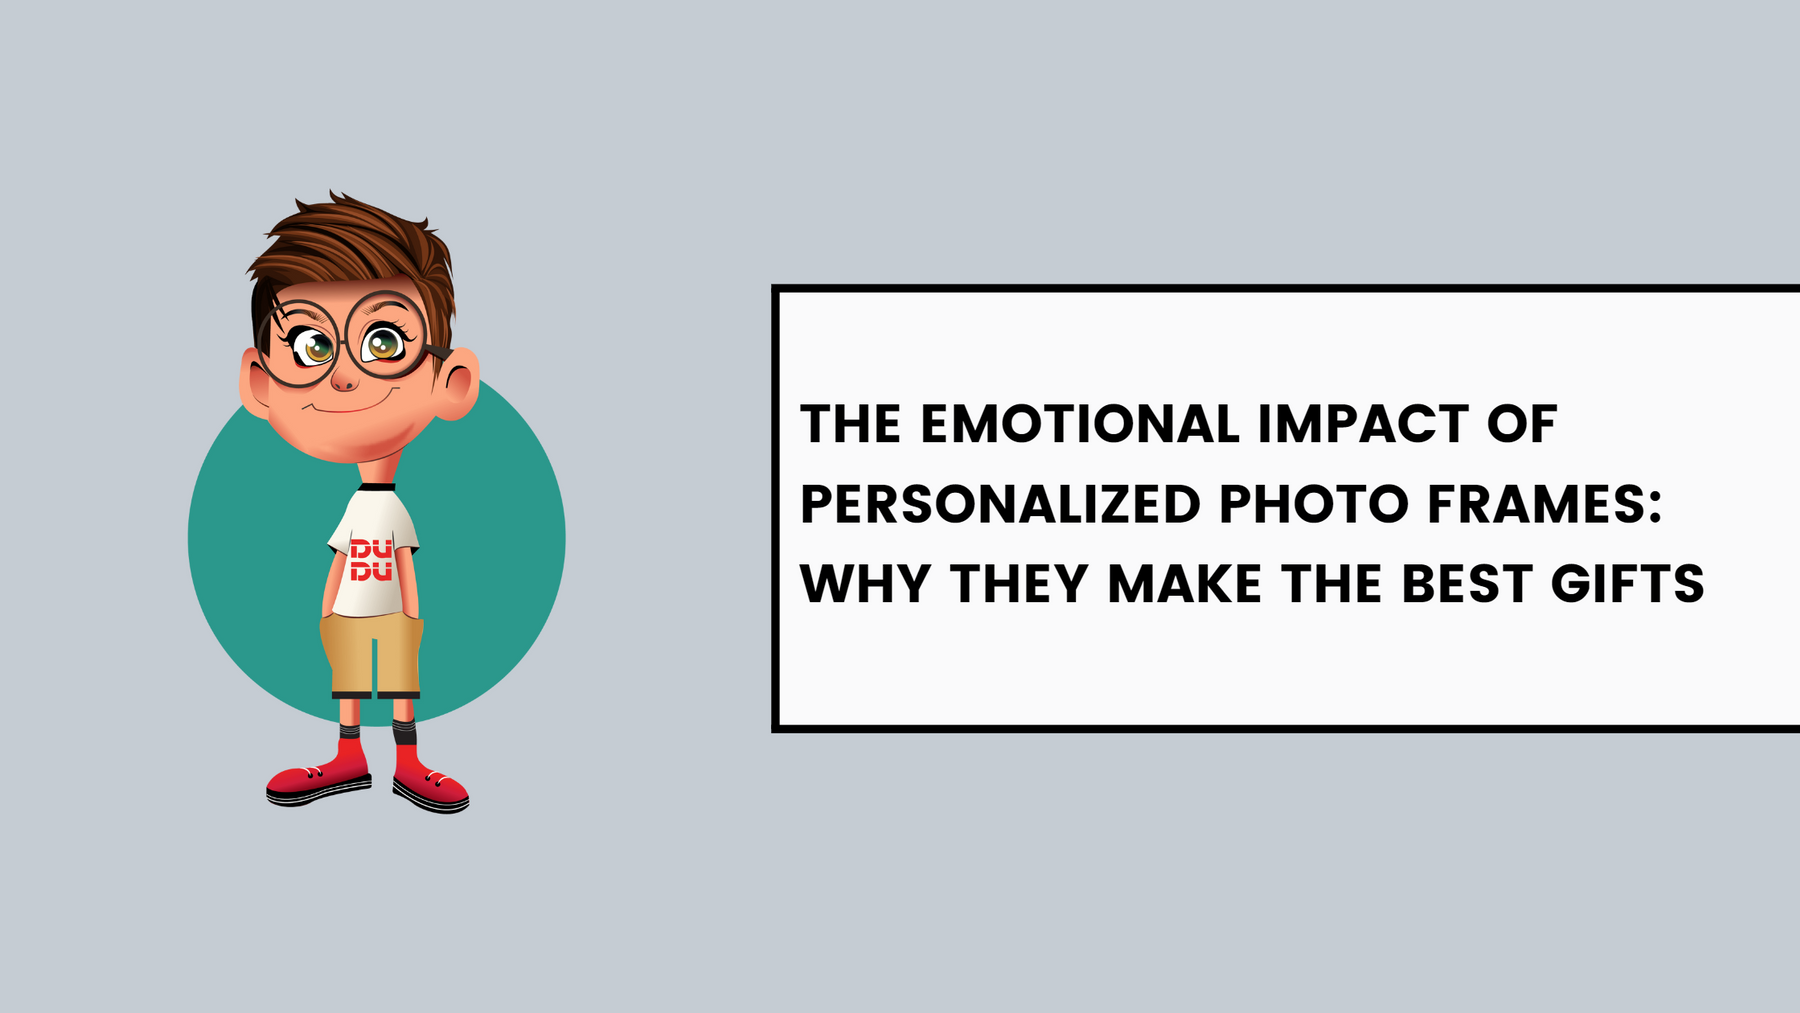 The Emotional Impact of Personalized Photo Frames: Why They Make the Best Gifts